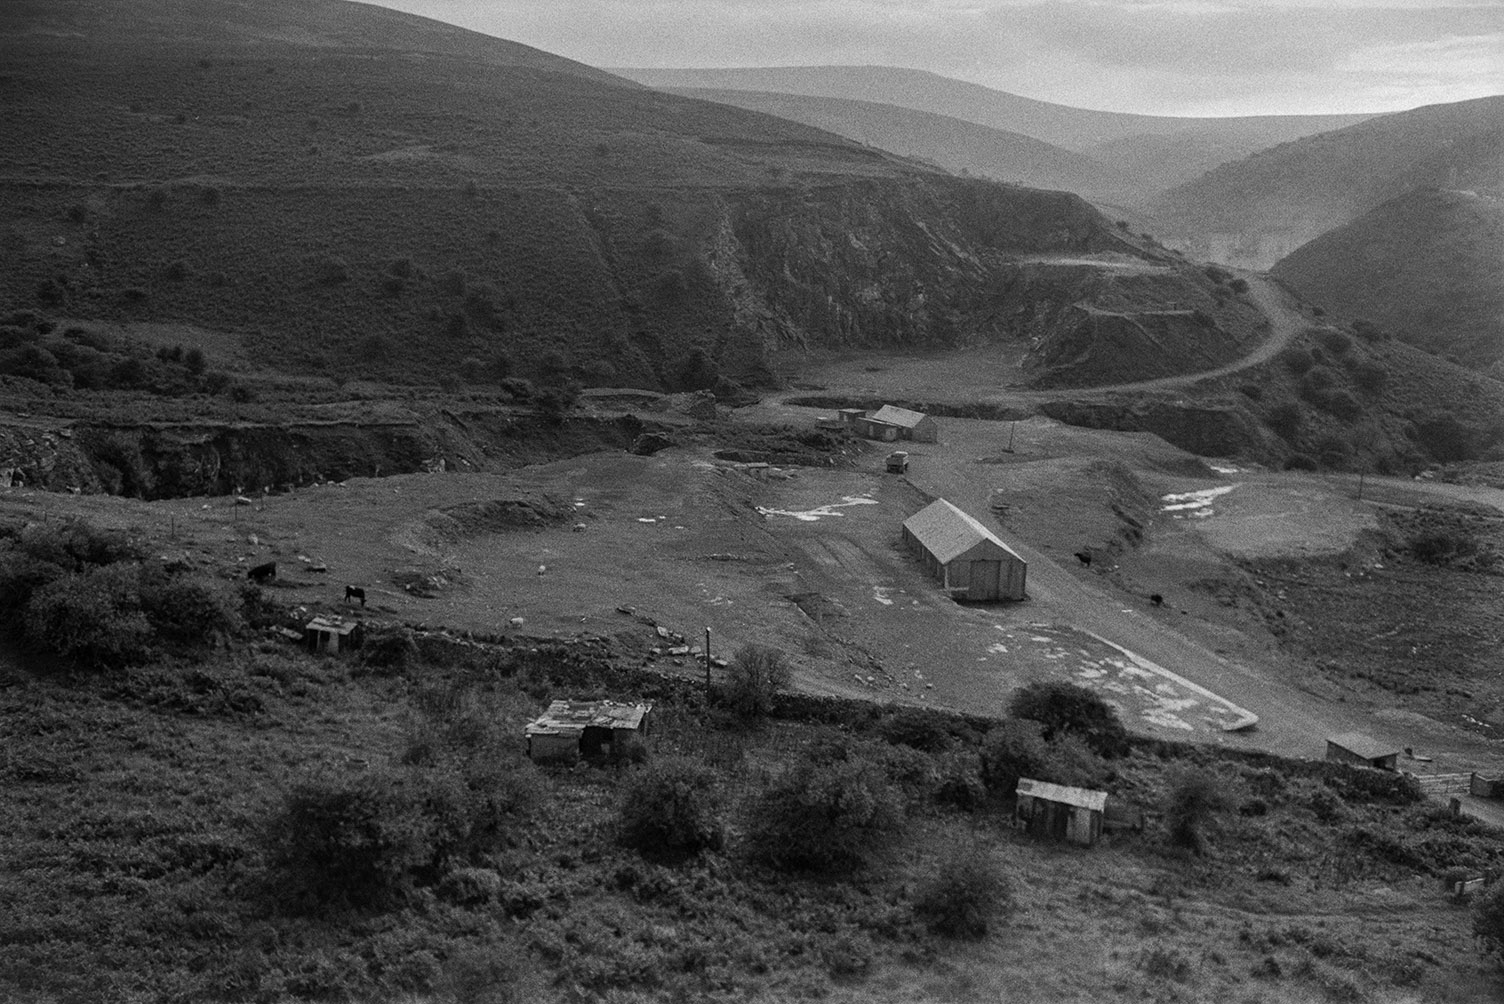 A quarry on a hillside with buildings and sheds in the foreground. It is possibly Merrivale Quarry.